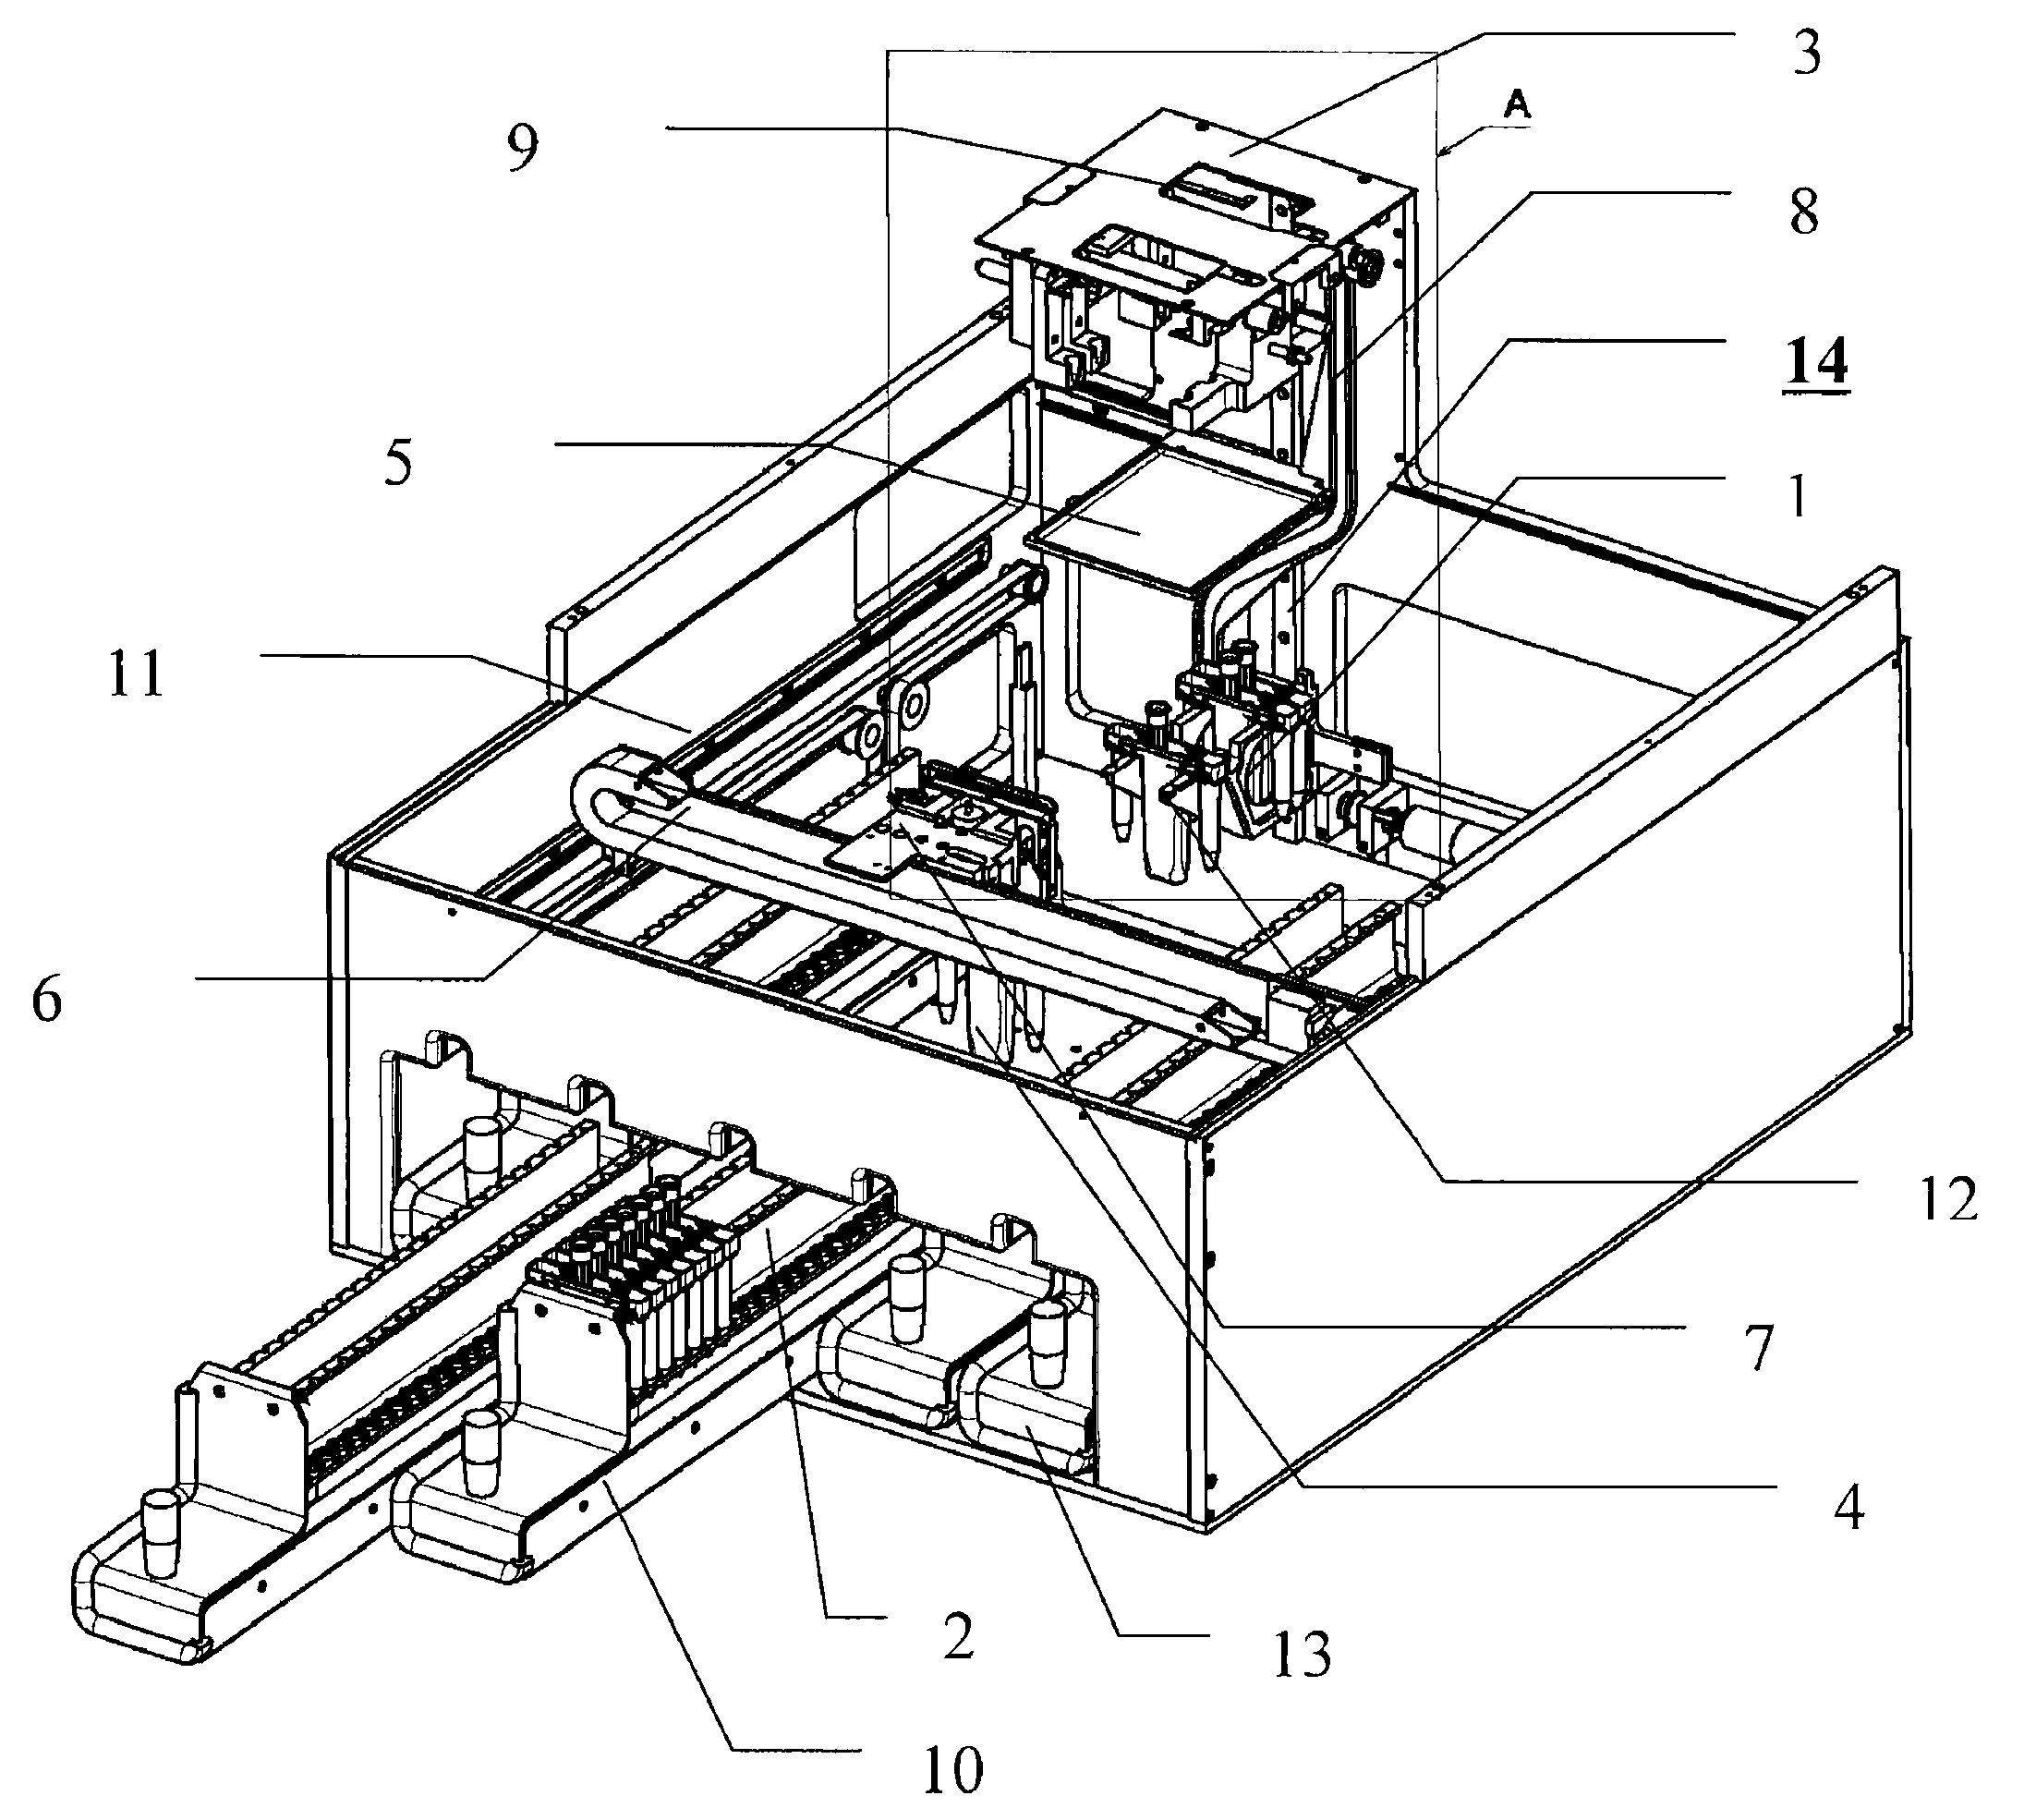 Multi-level diagnostic apparatus with a lift system